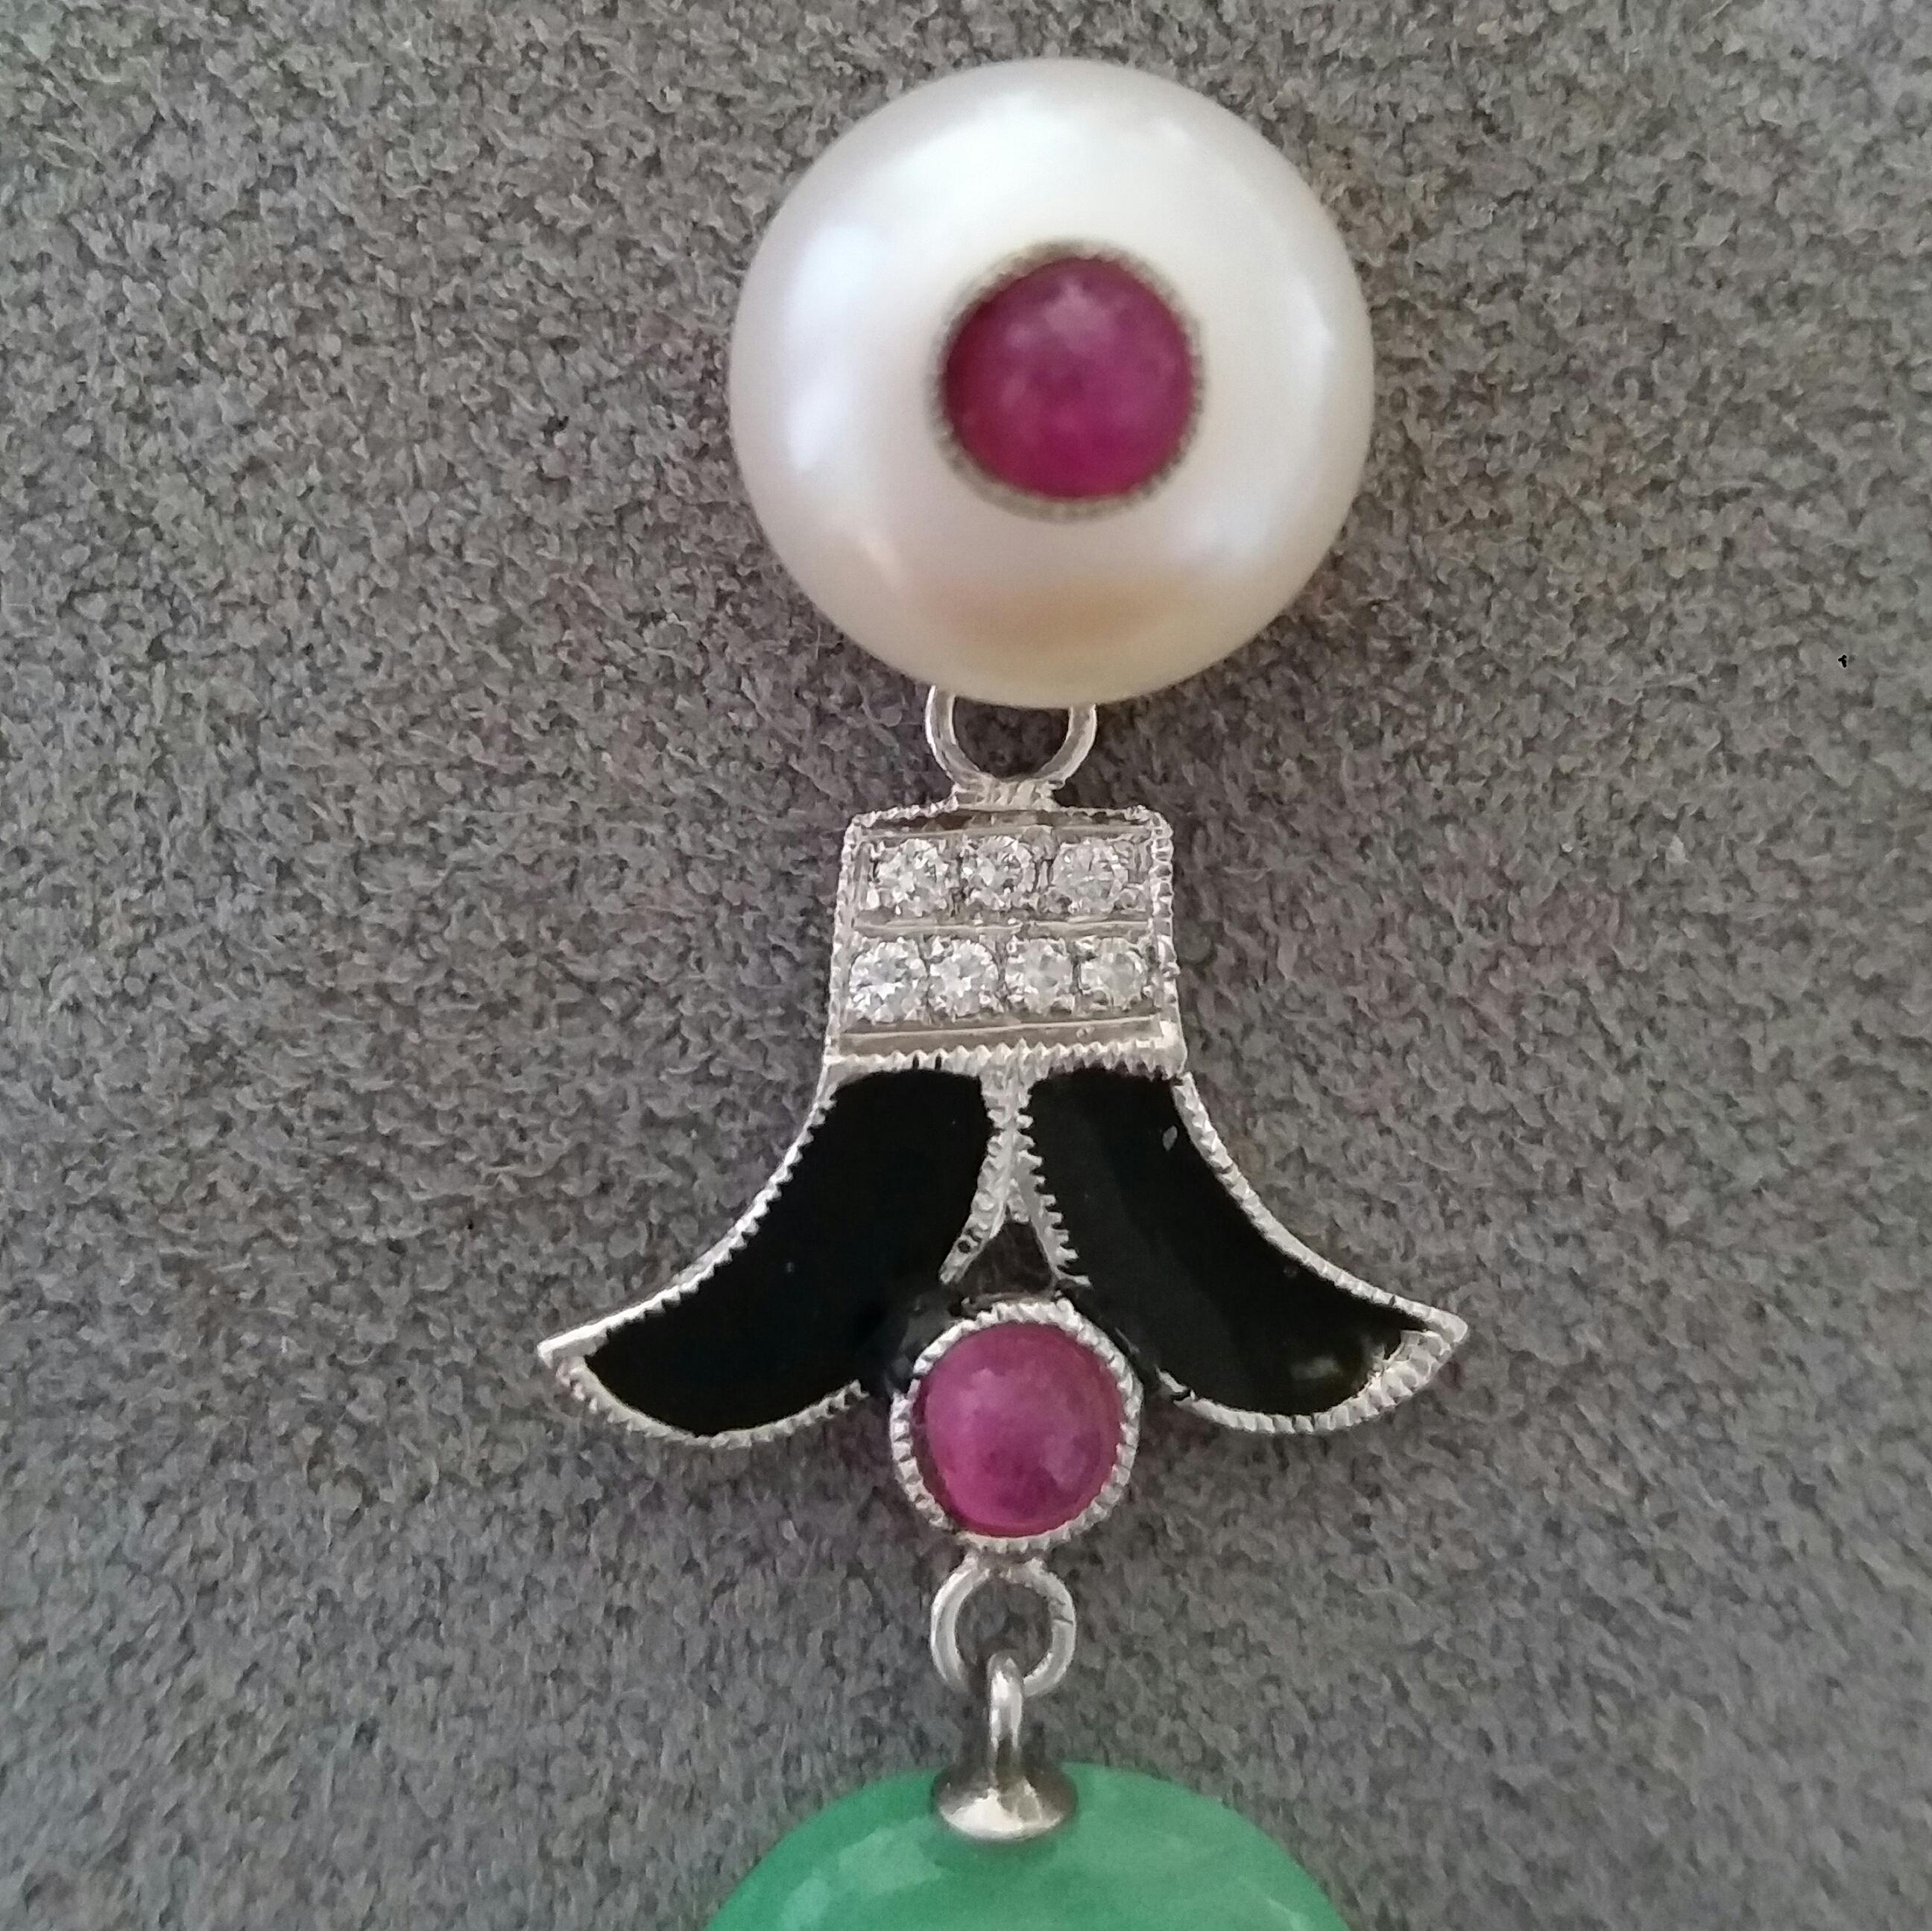 Art Deco earrings with 2 fresh water pearls and round rubies cabochon in the center, middle parts in white gold, full cut round diamonds,small rubies,black enamels,bottom parts have 2 oval shape carved Burma Jades.

In 1978 our workshop started in